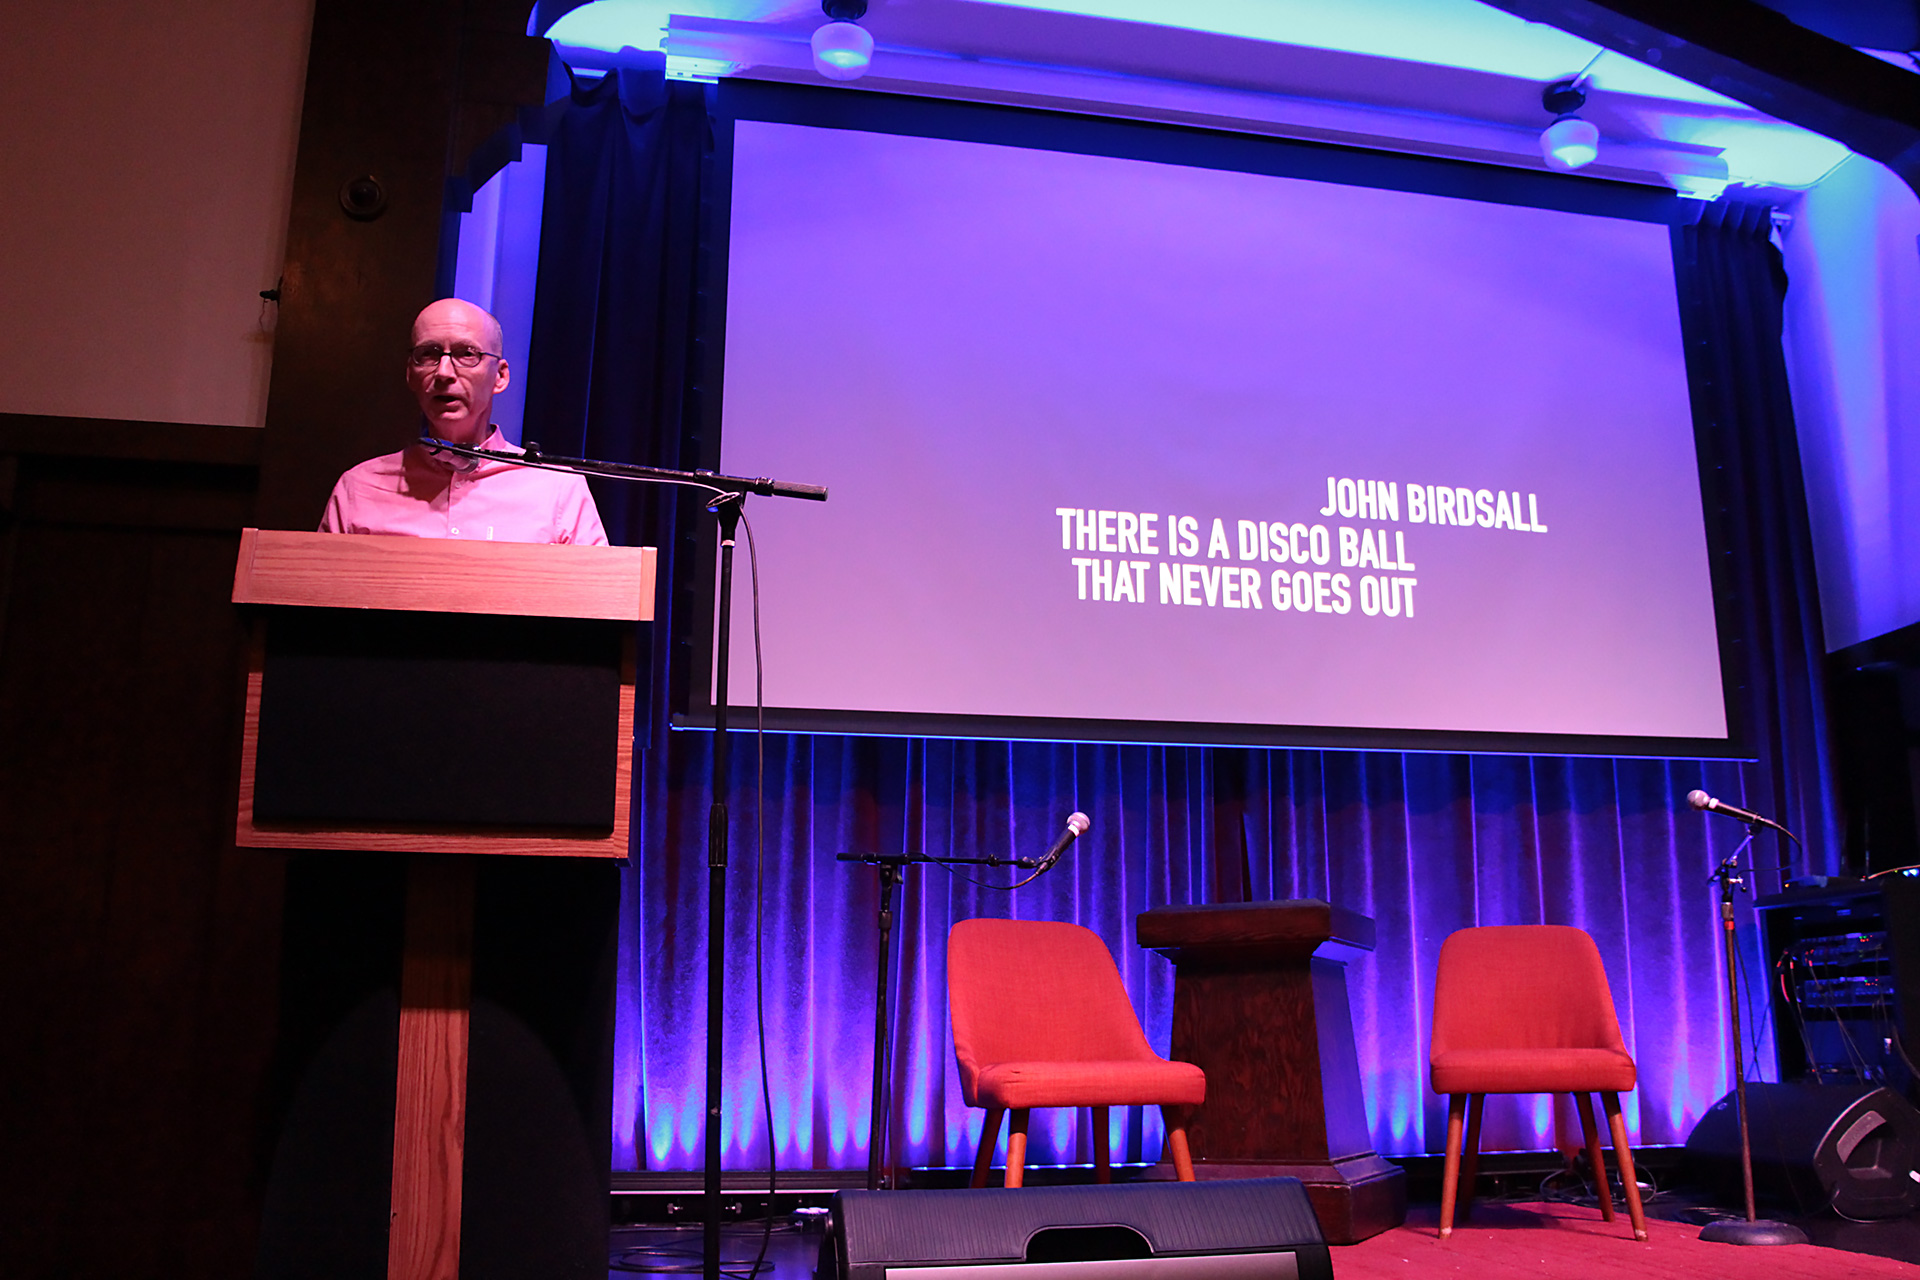 John Birdsall, an award-winning local writer, delivered a history lesson interwoven with personal travel tales exploring the refuge of queer safe spaces that exist around the world.